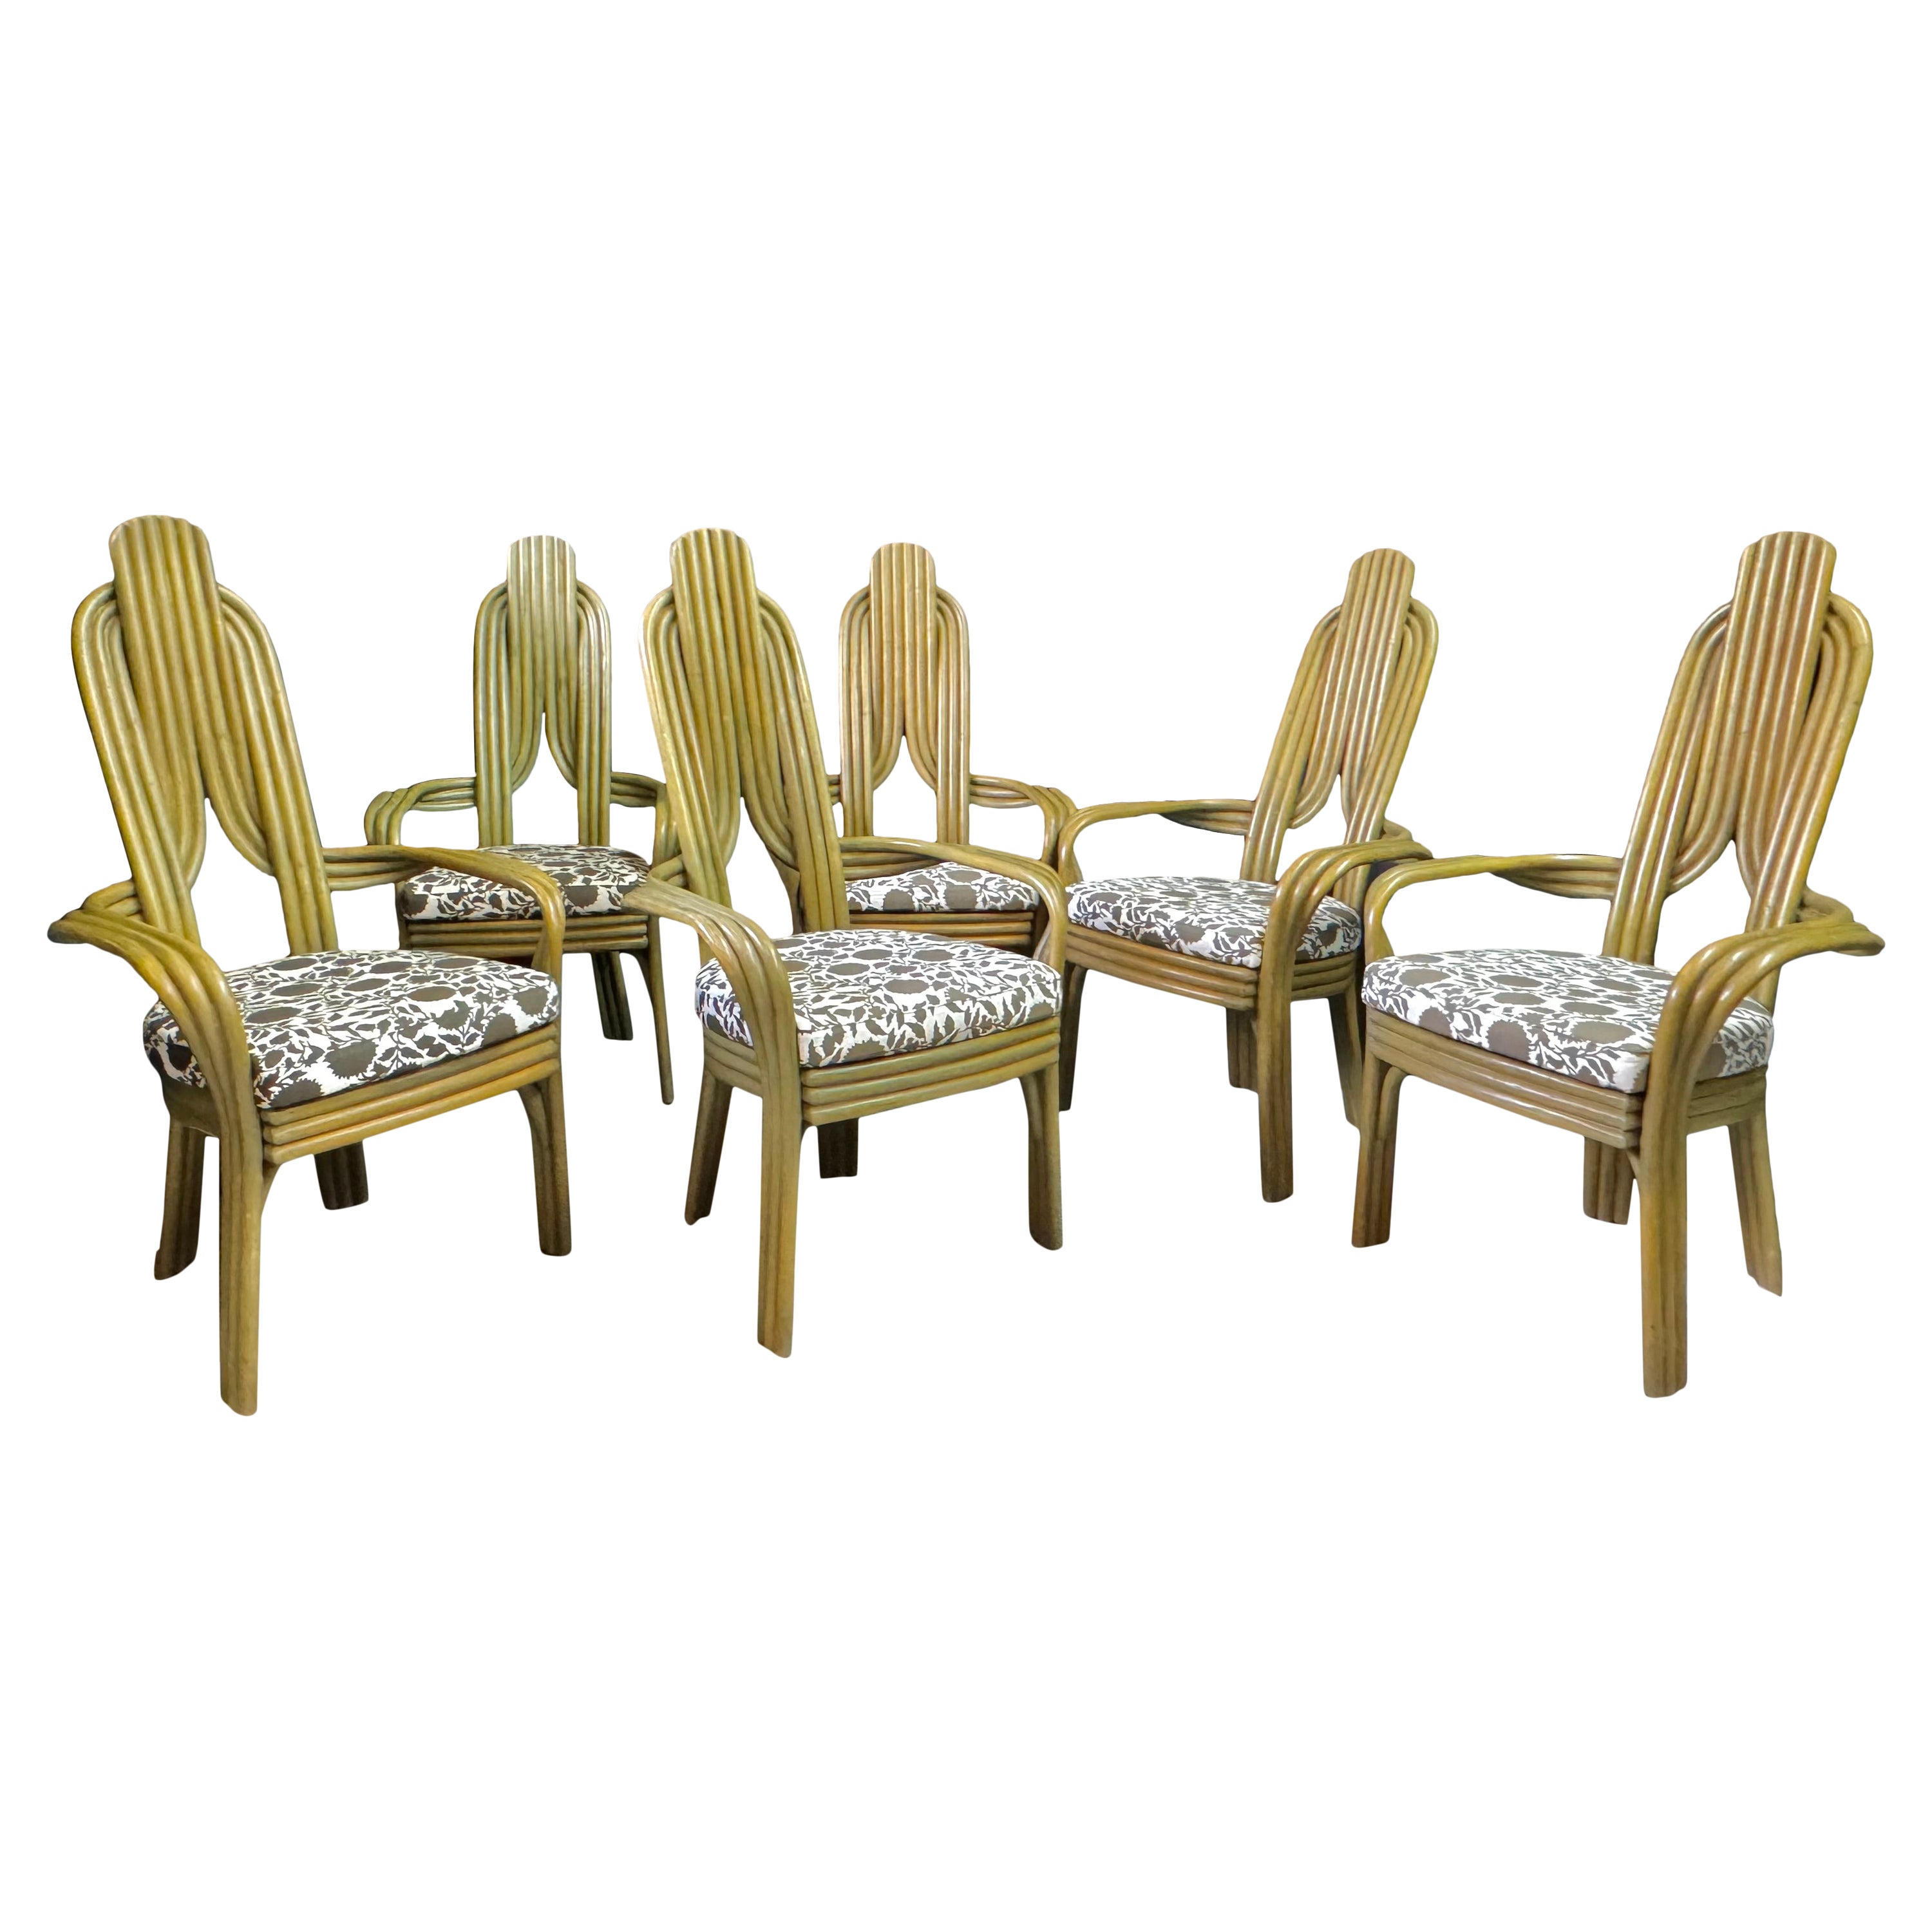 Unique Set of Six Dining Chairs by Axel Enthoven for Rohe Noorwolde, 1970s  For Sale